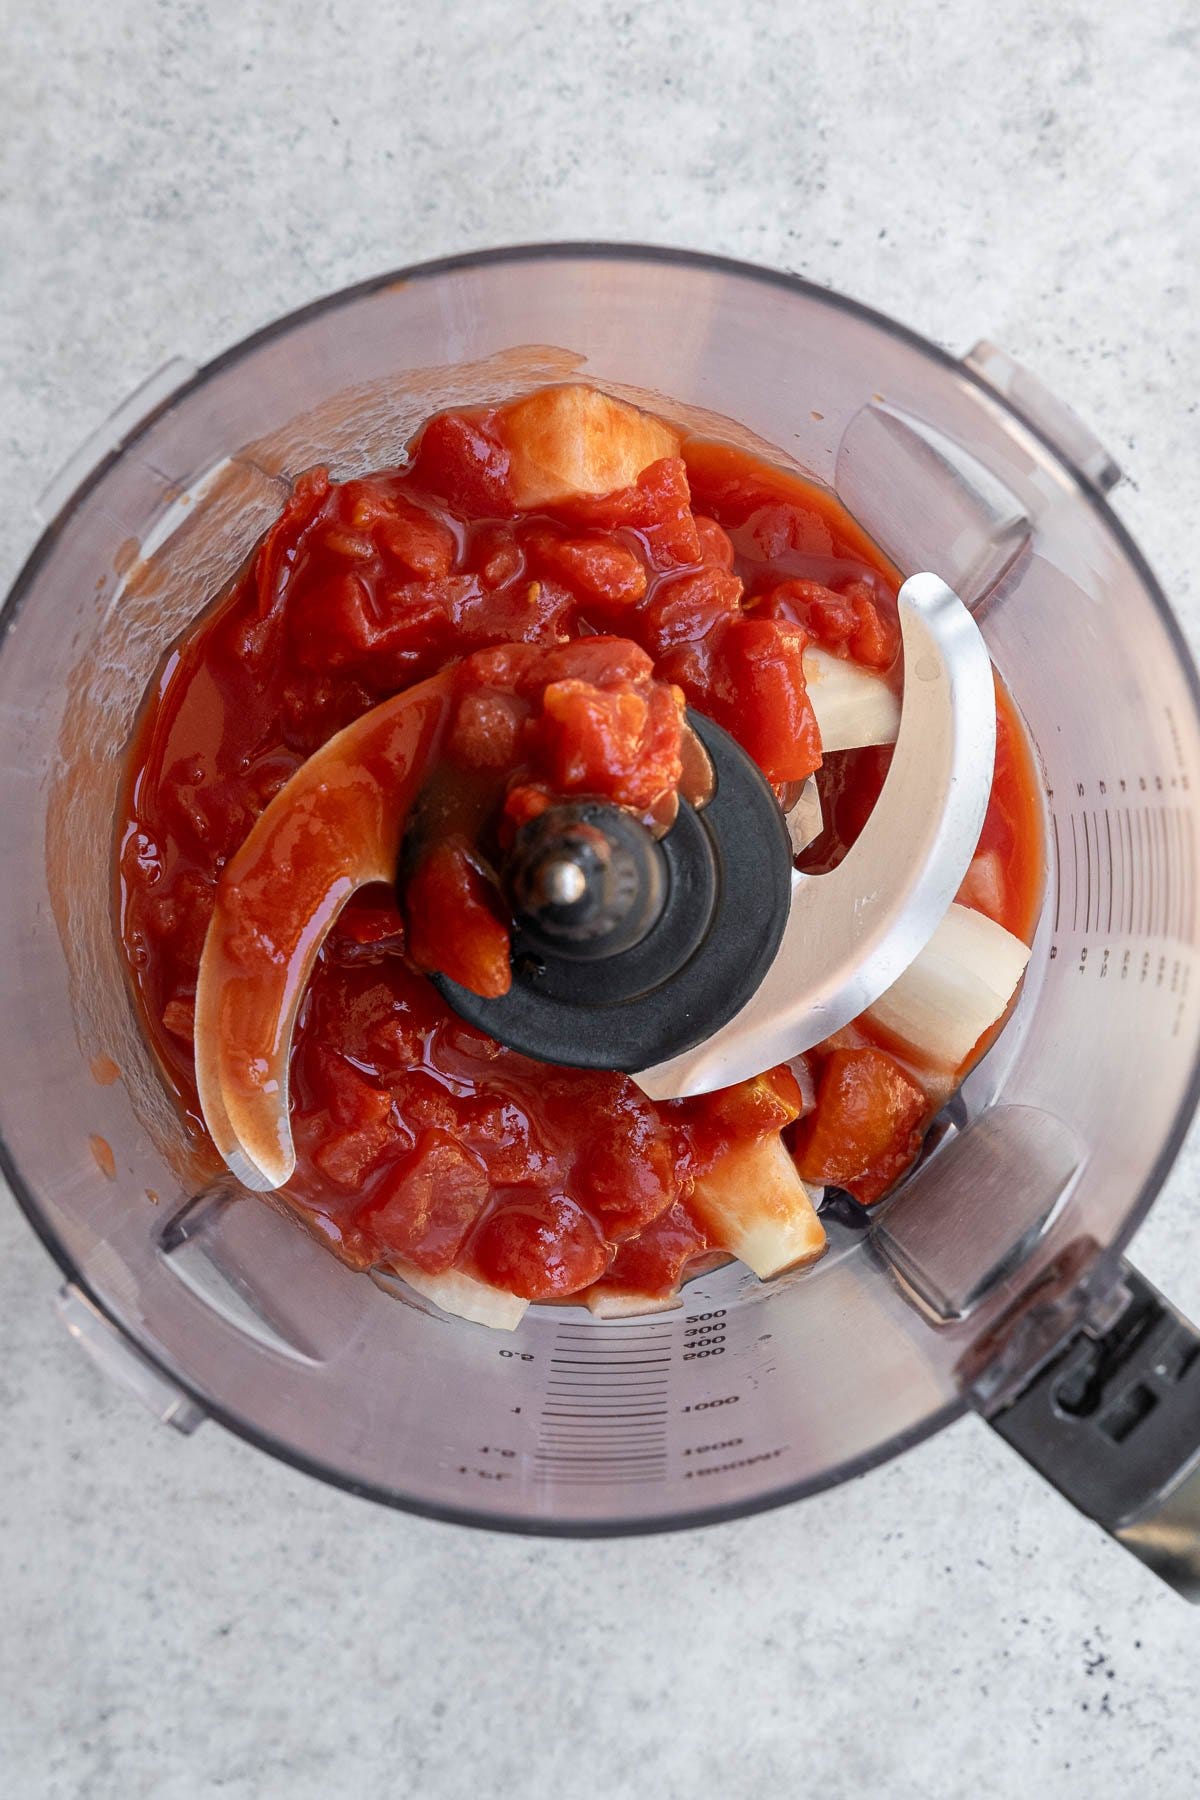 Blending tomatoes and onion